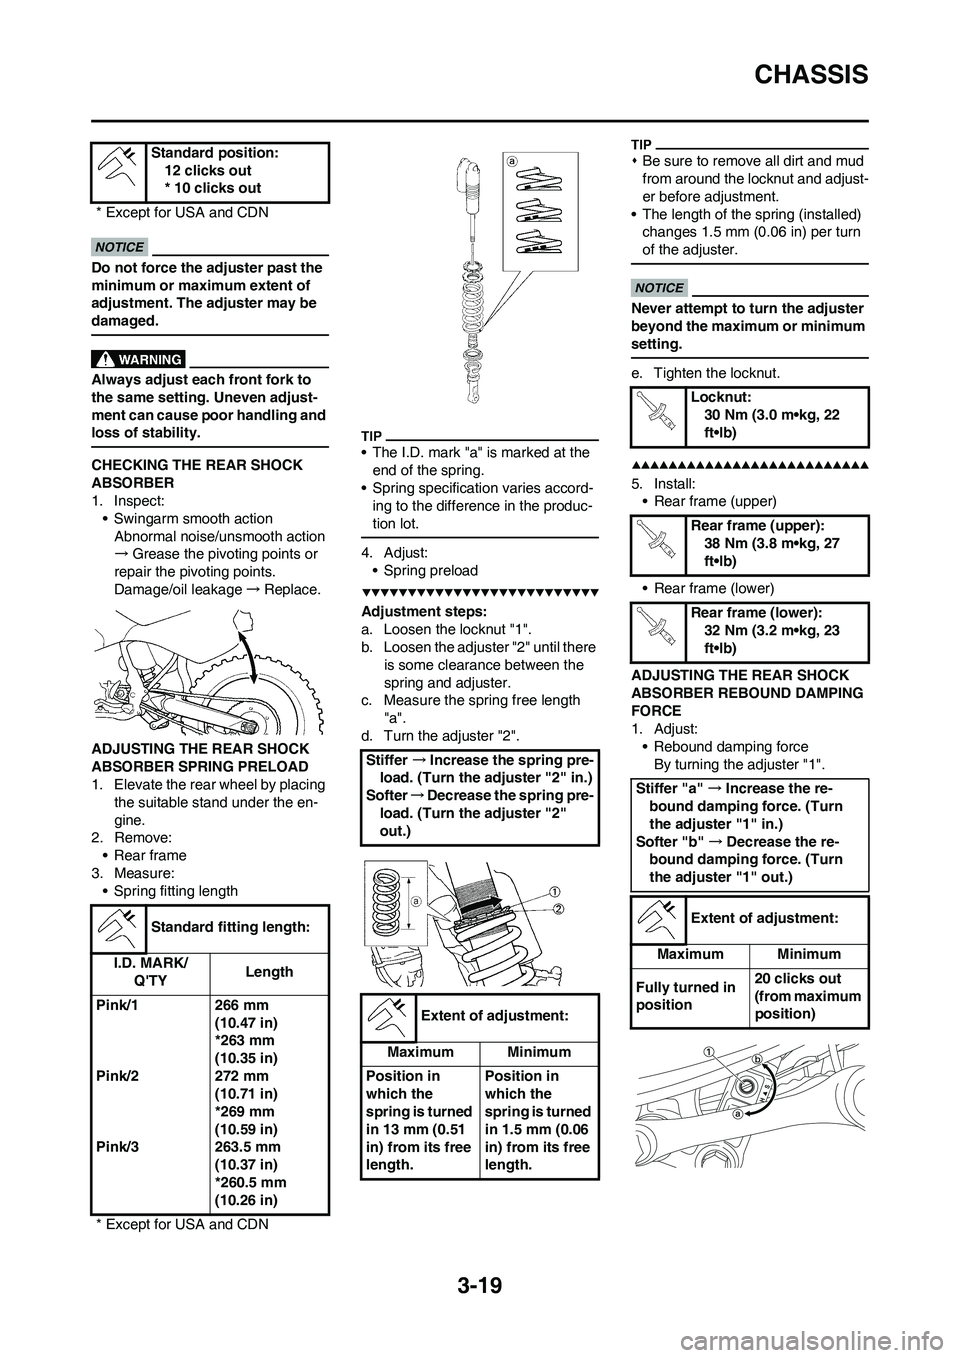 YAMAHA YZ450F 2009  Owners Manual 3-19
CHASSIS
Do not force the adjuster past the 
minimum or maximum extent of 
adjustment. The adjuster may be 
damaged.
Always adjust each front fork to 
the same setting. Uneven adjust-
ment can cau